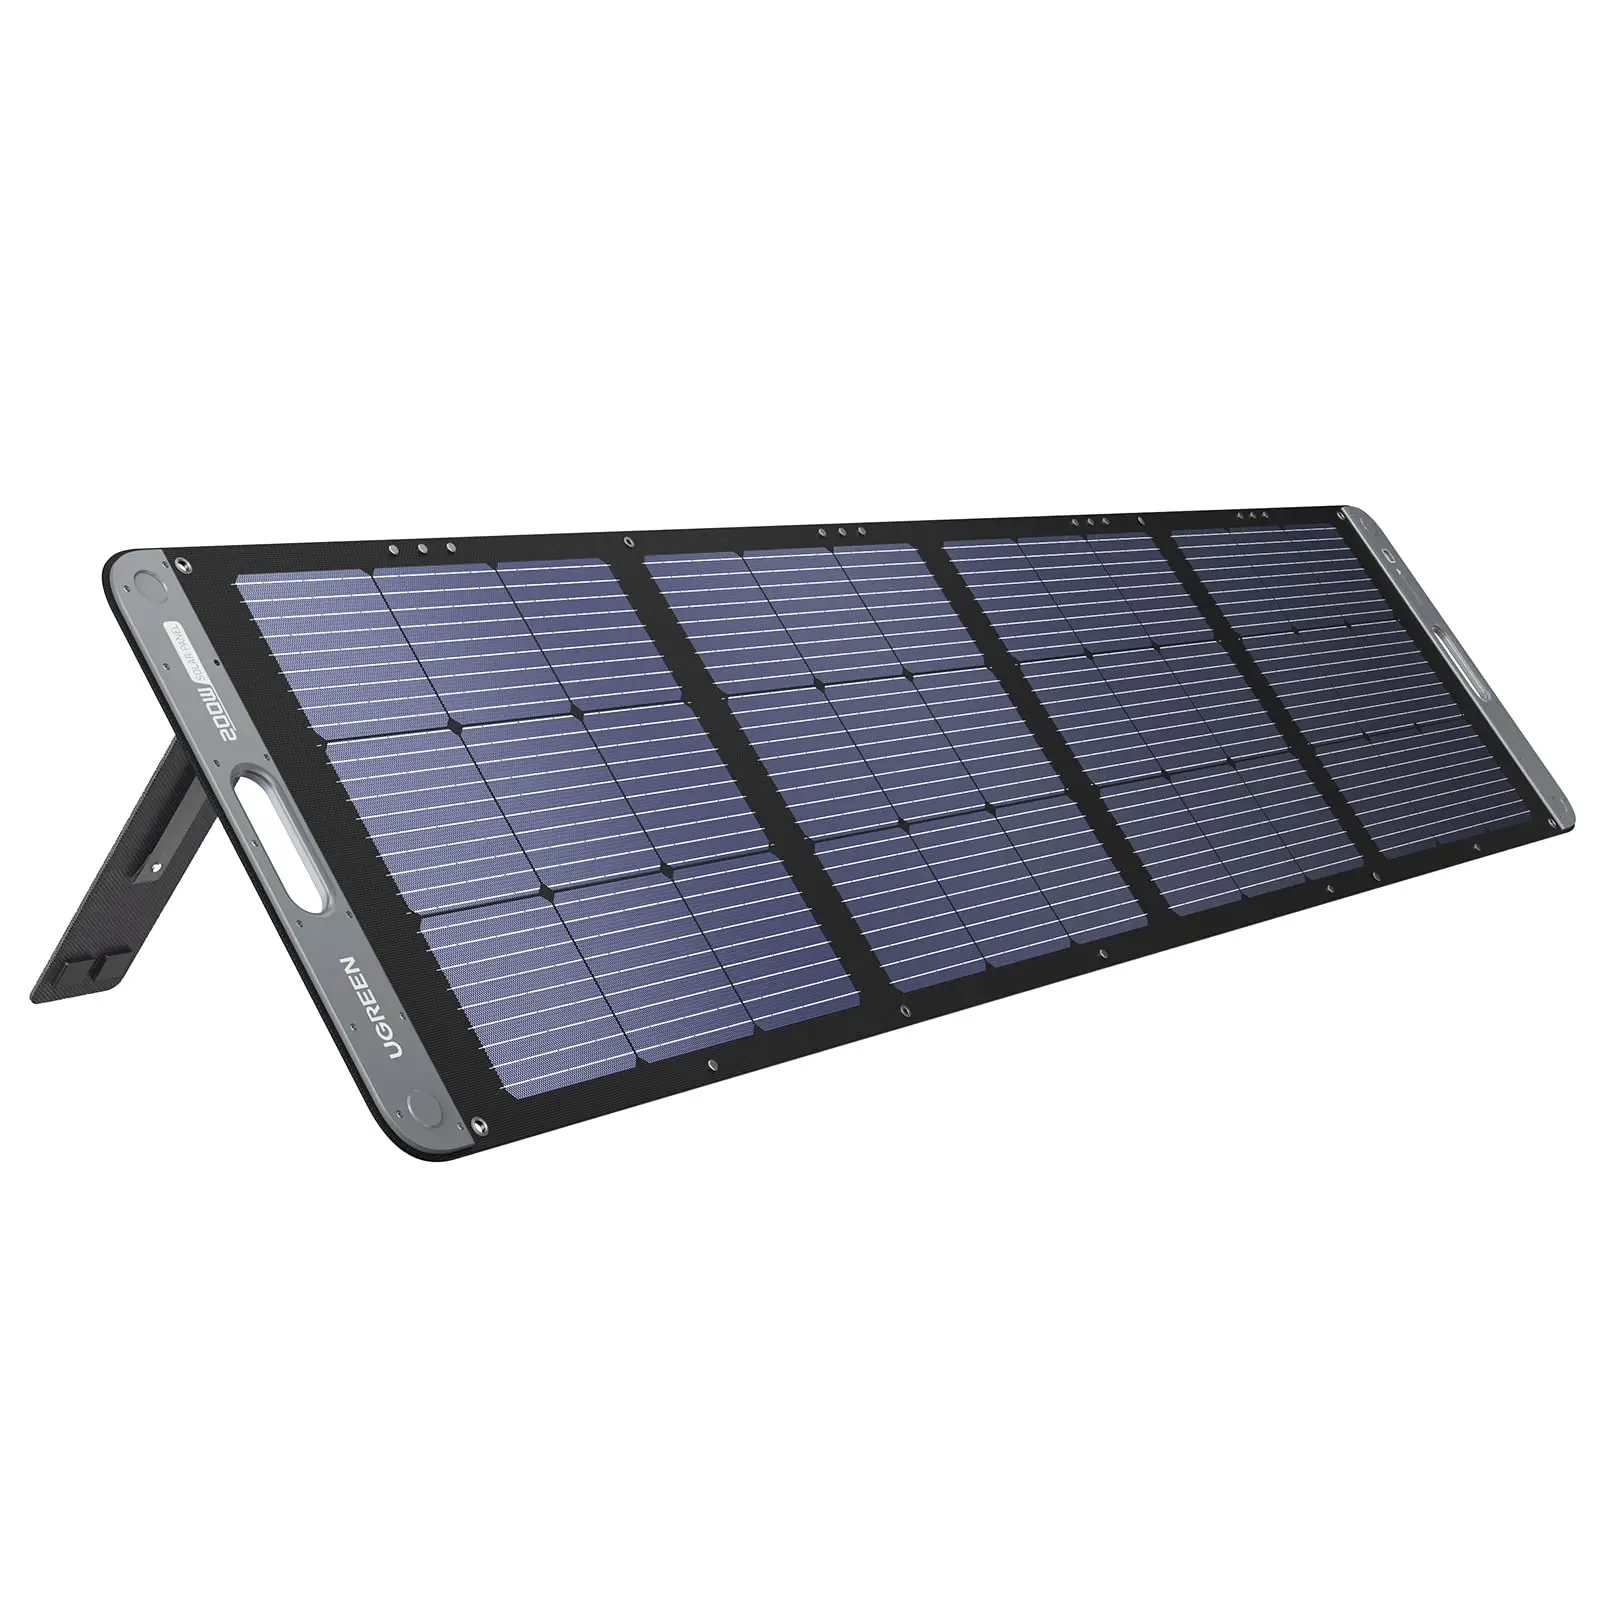 200 w solar panel - What size is a 200W solar panel